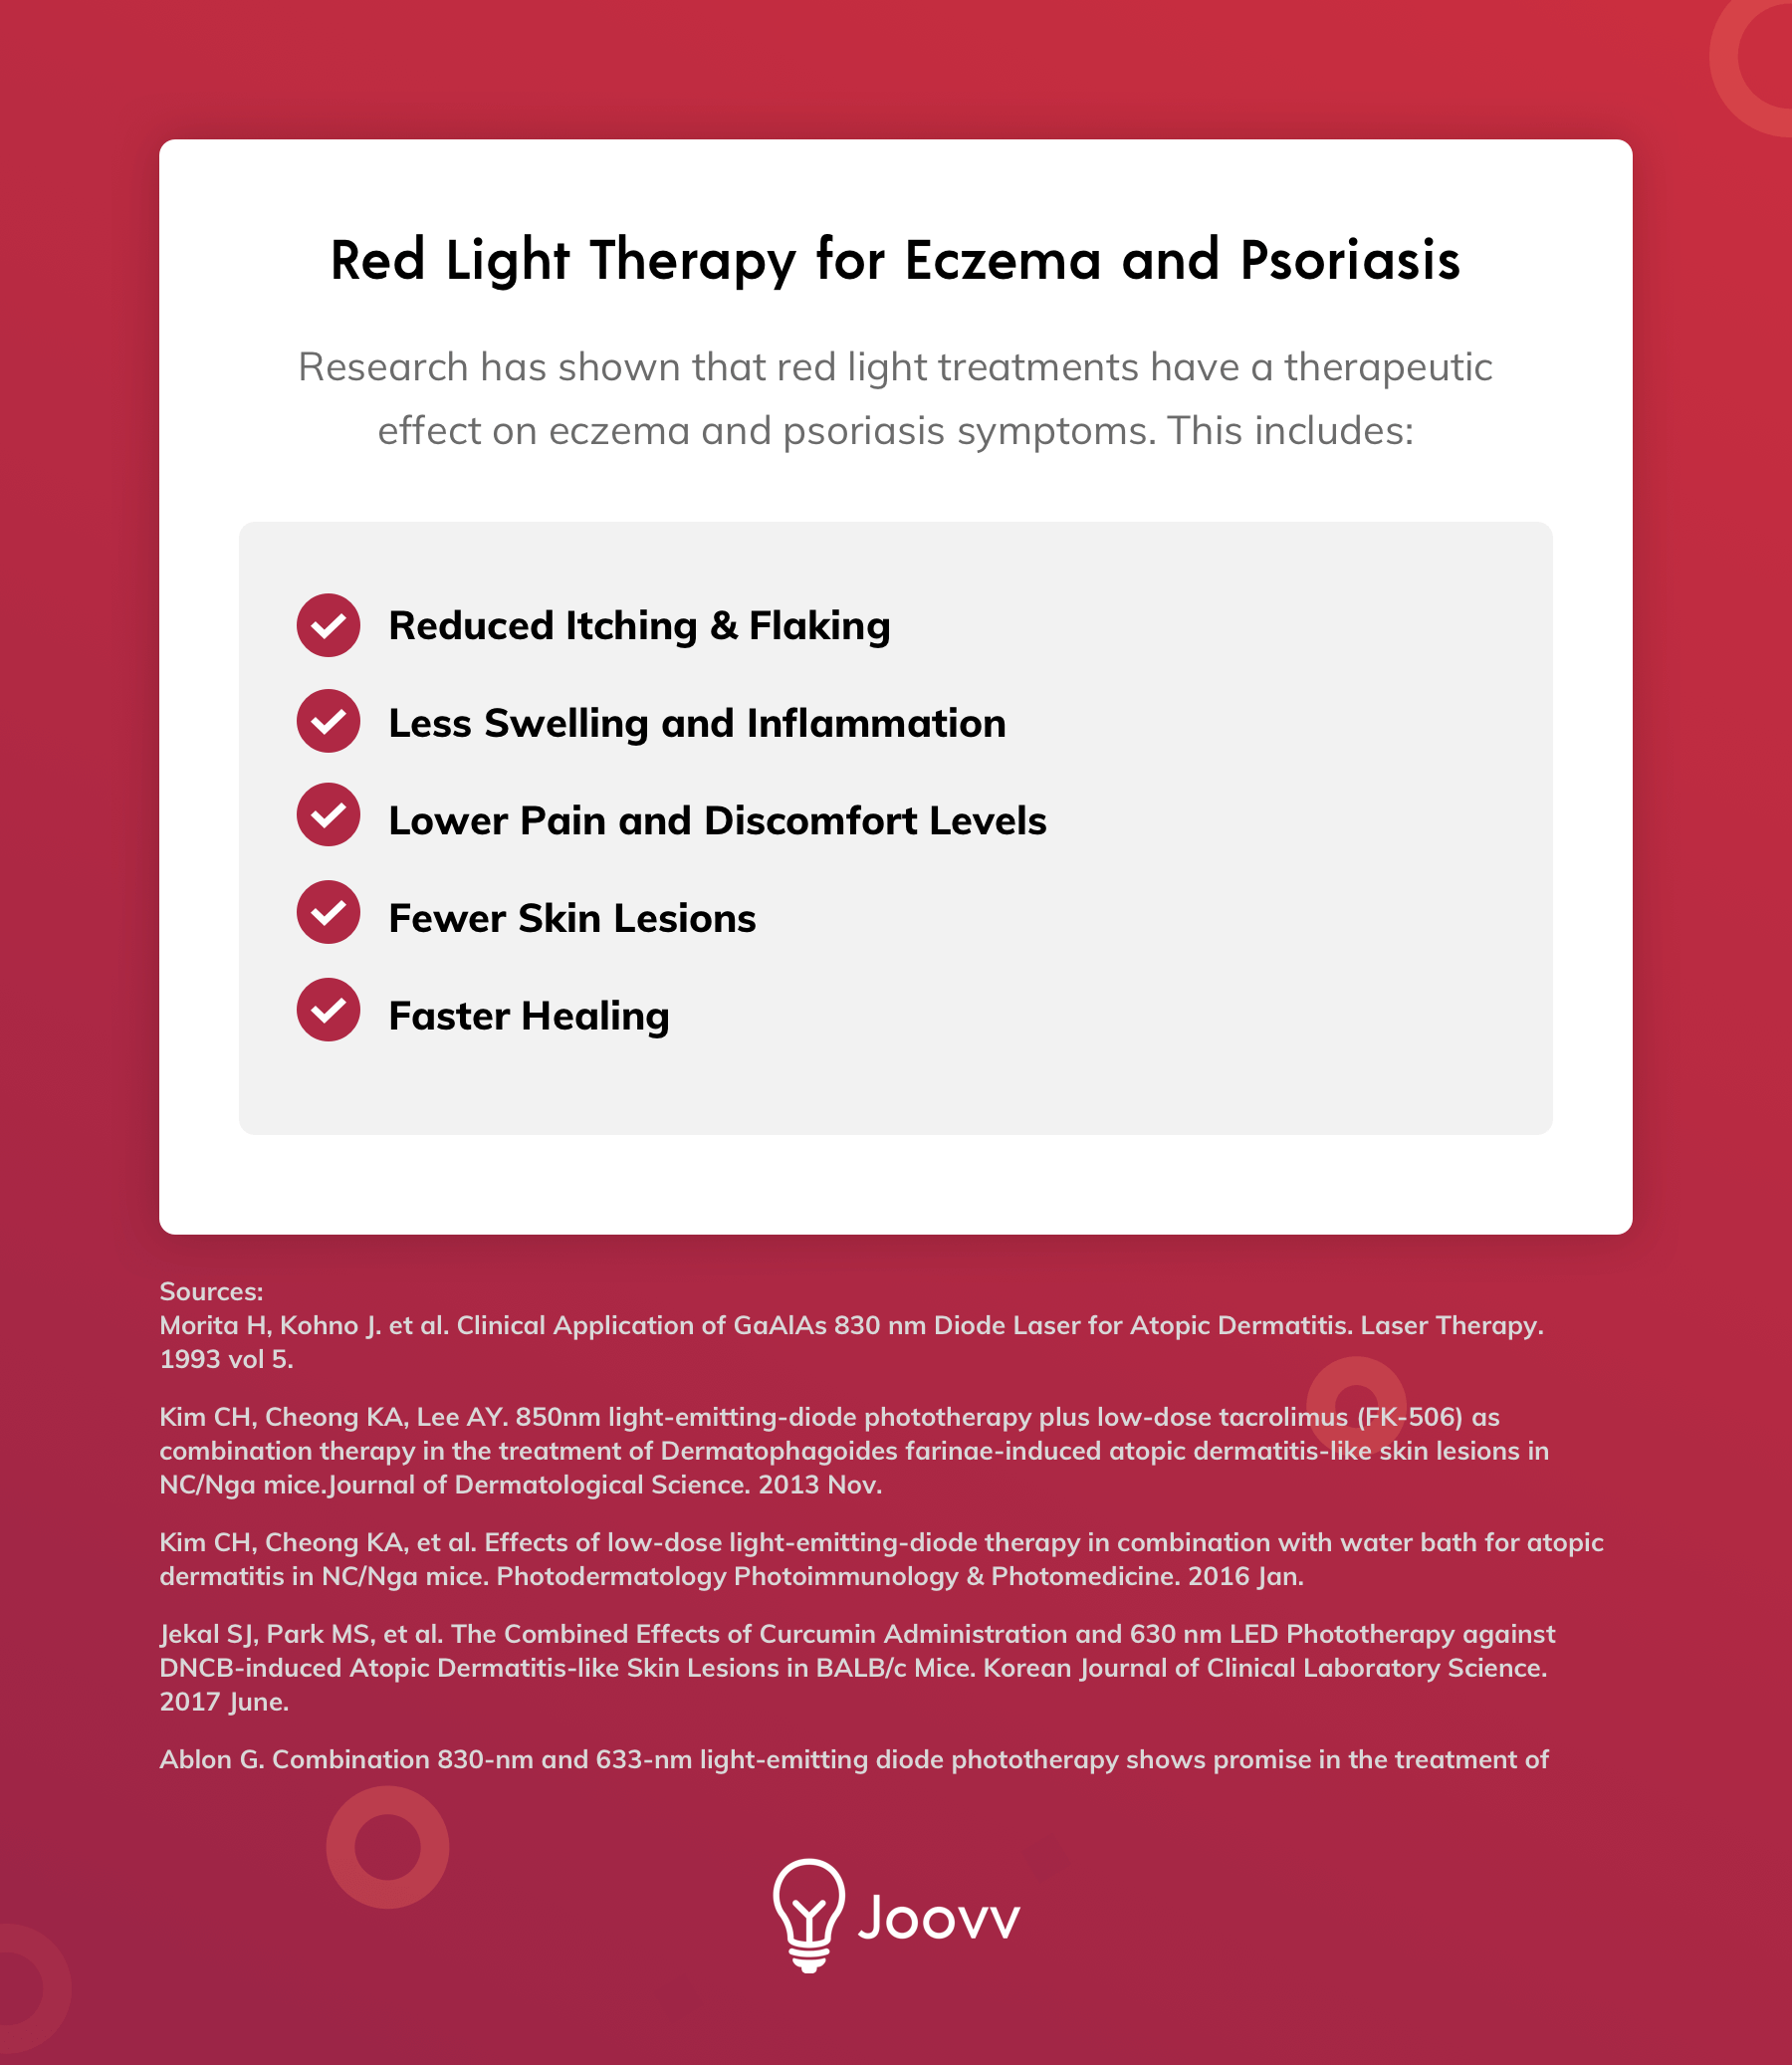 Red Light Therapy for Treating Eczema Psoriasis Symptoms - ºdegree Wellness